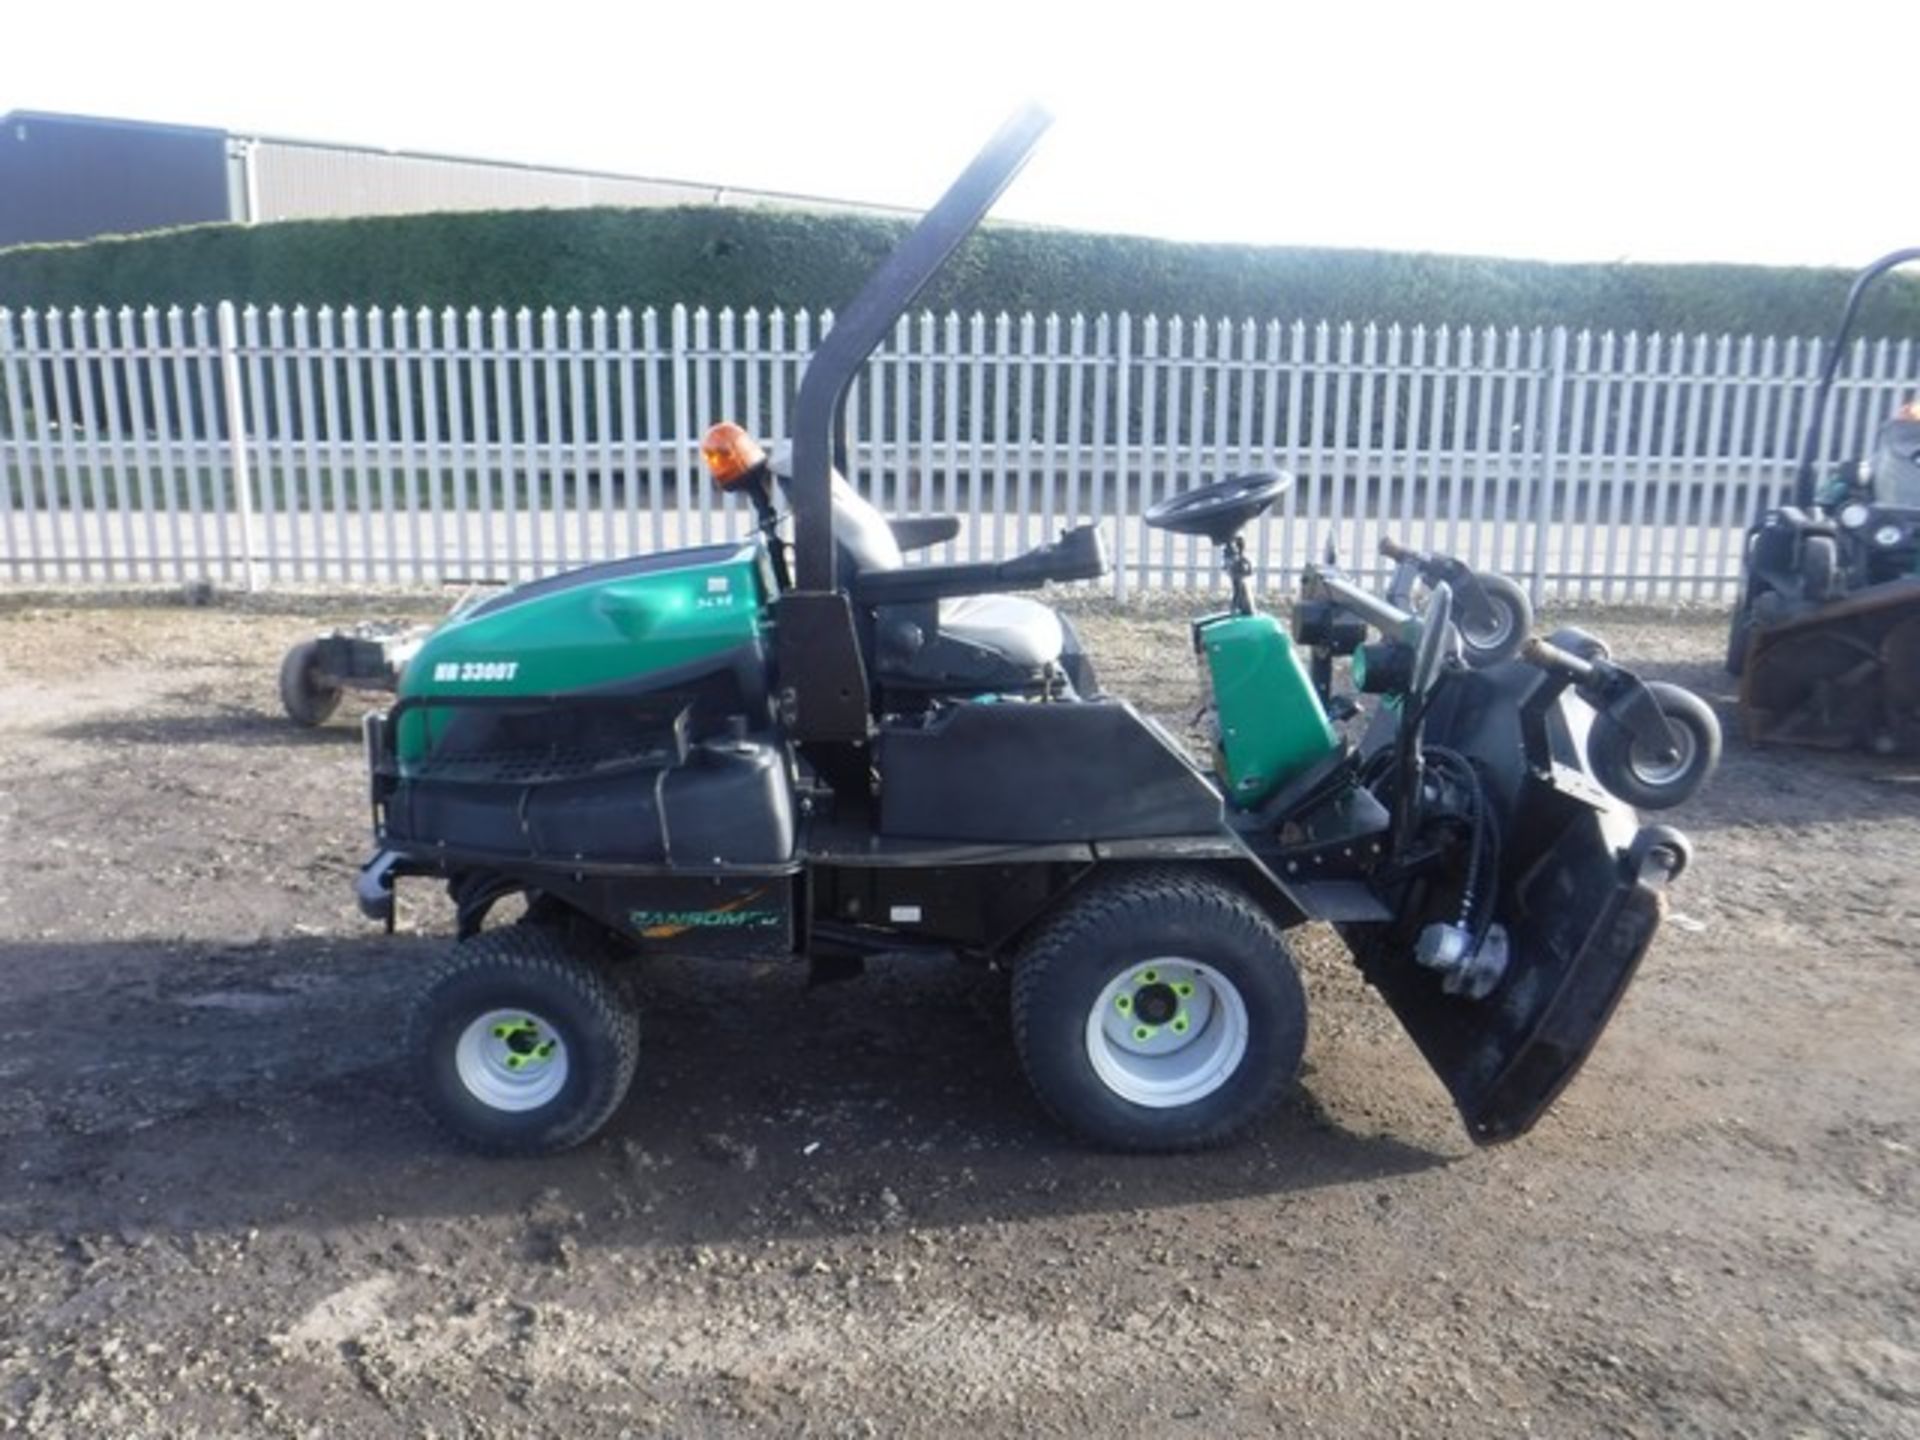 2010 RANSOMES HR 3300T diesel rotary ride on mower. REG NO SF10 GSO, FL NO FR000628. 917 hrs - Image 3 of 6